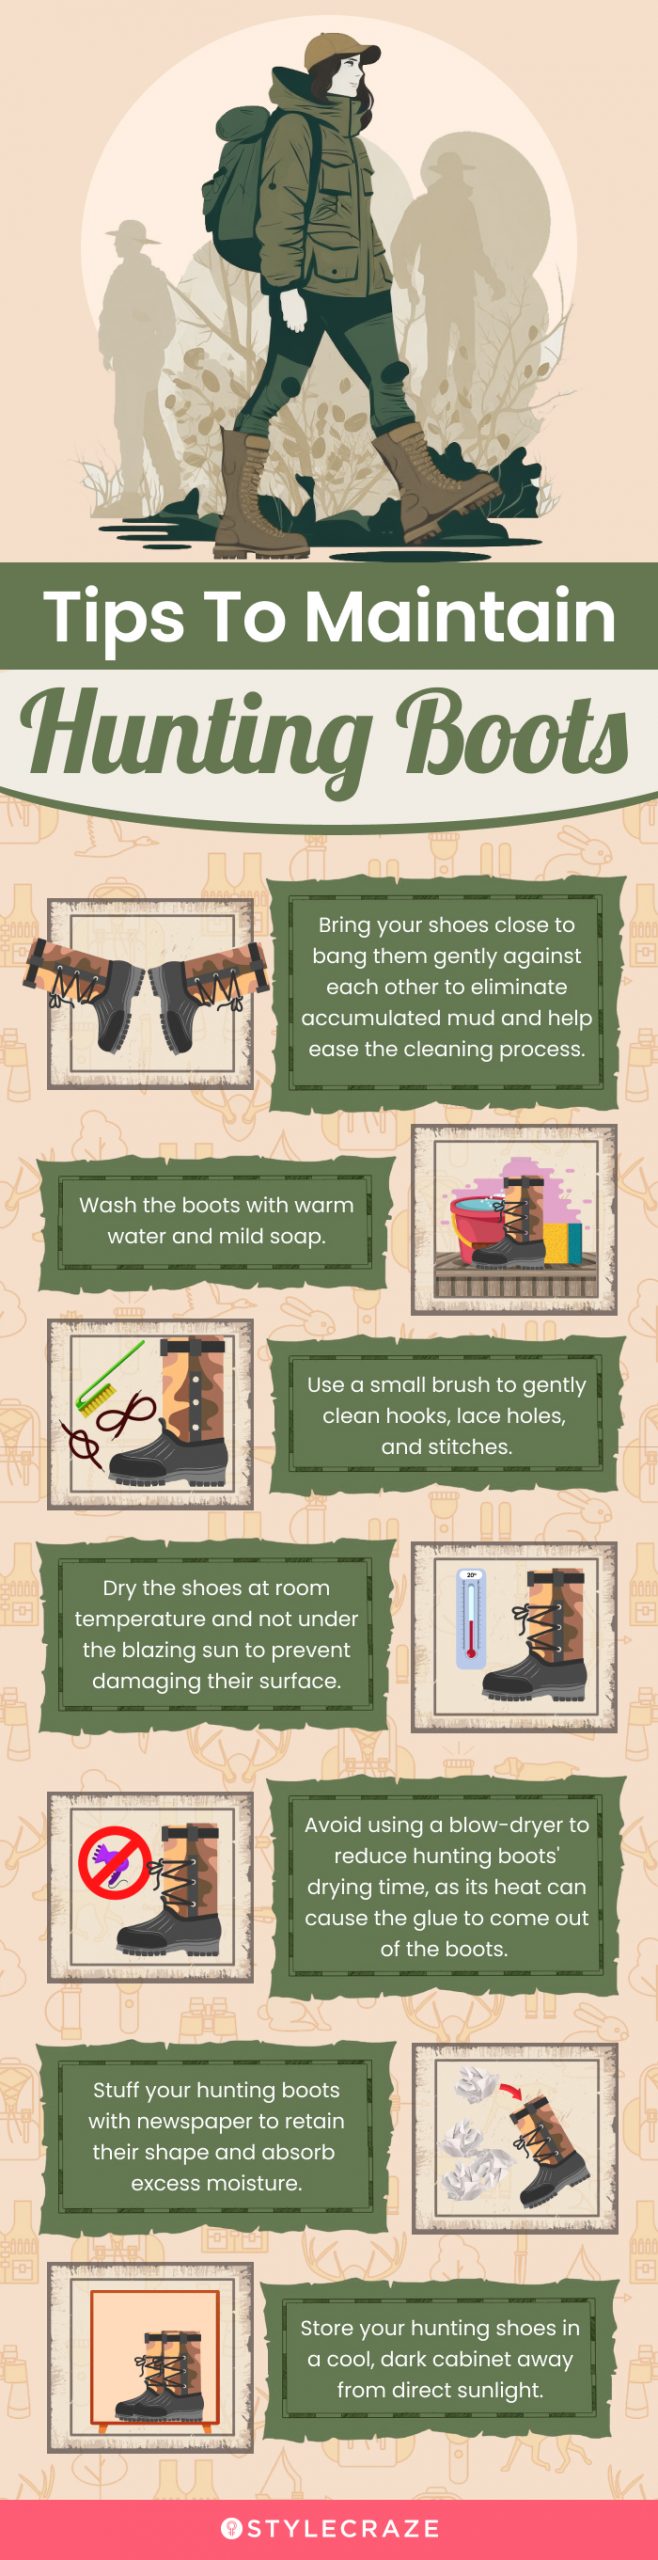 Tips To Maintain Hunting Boots (infographic)